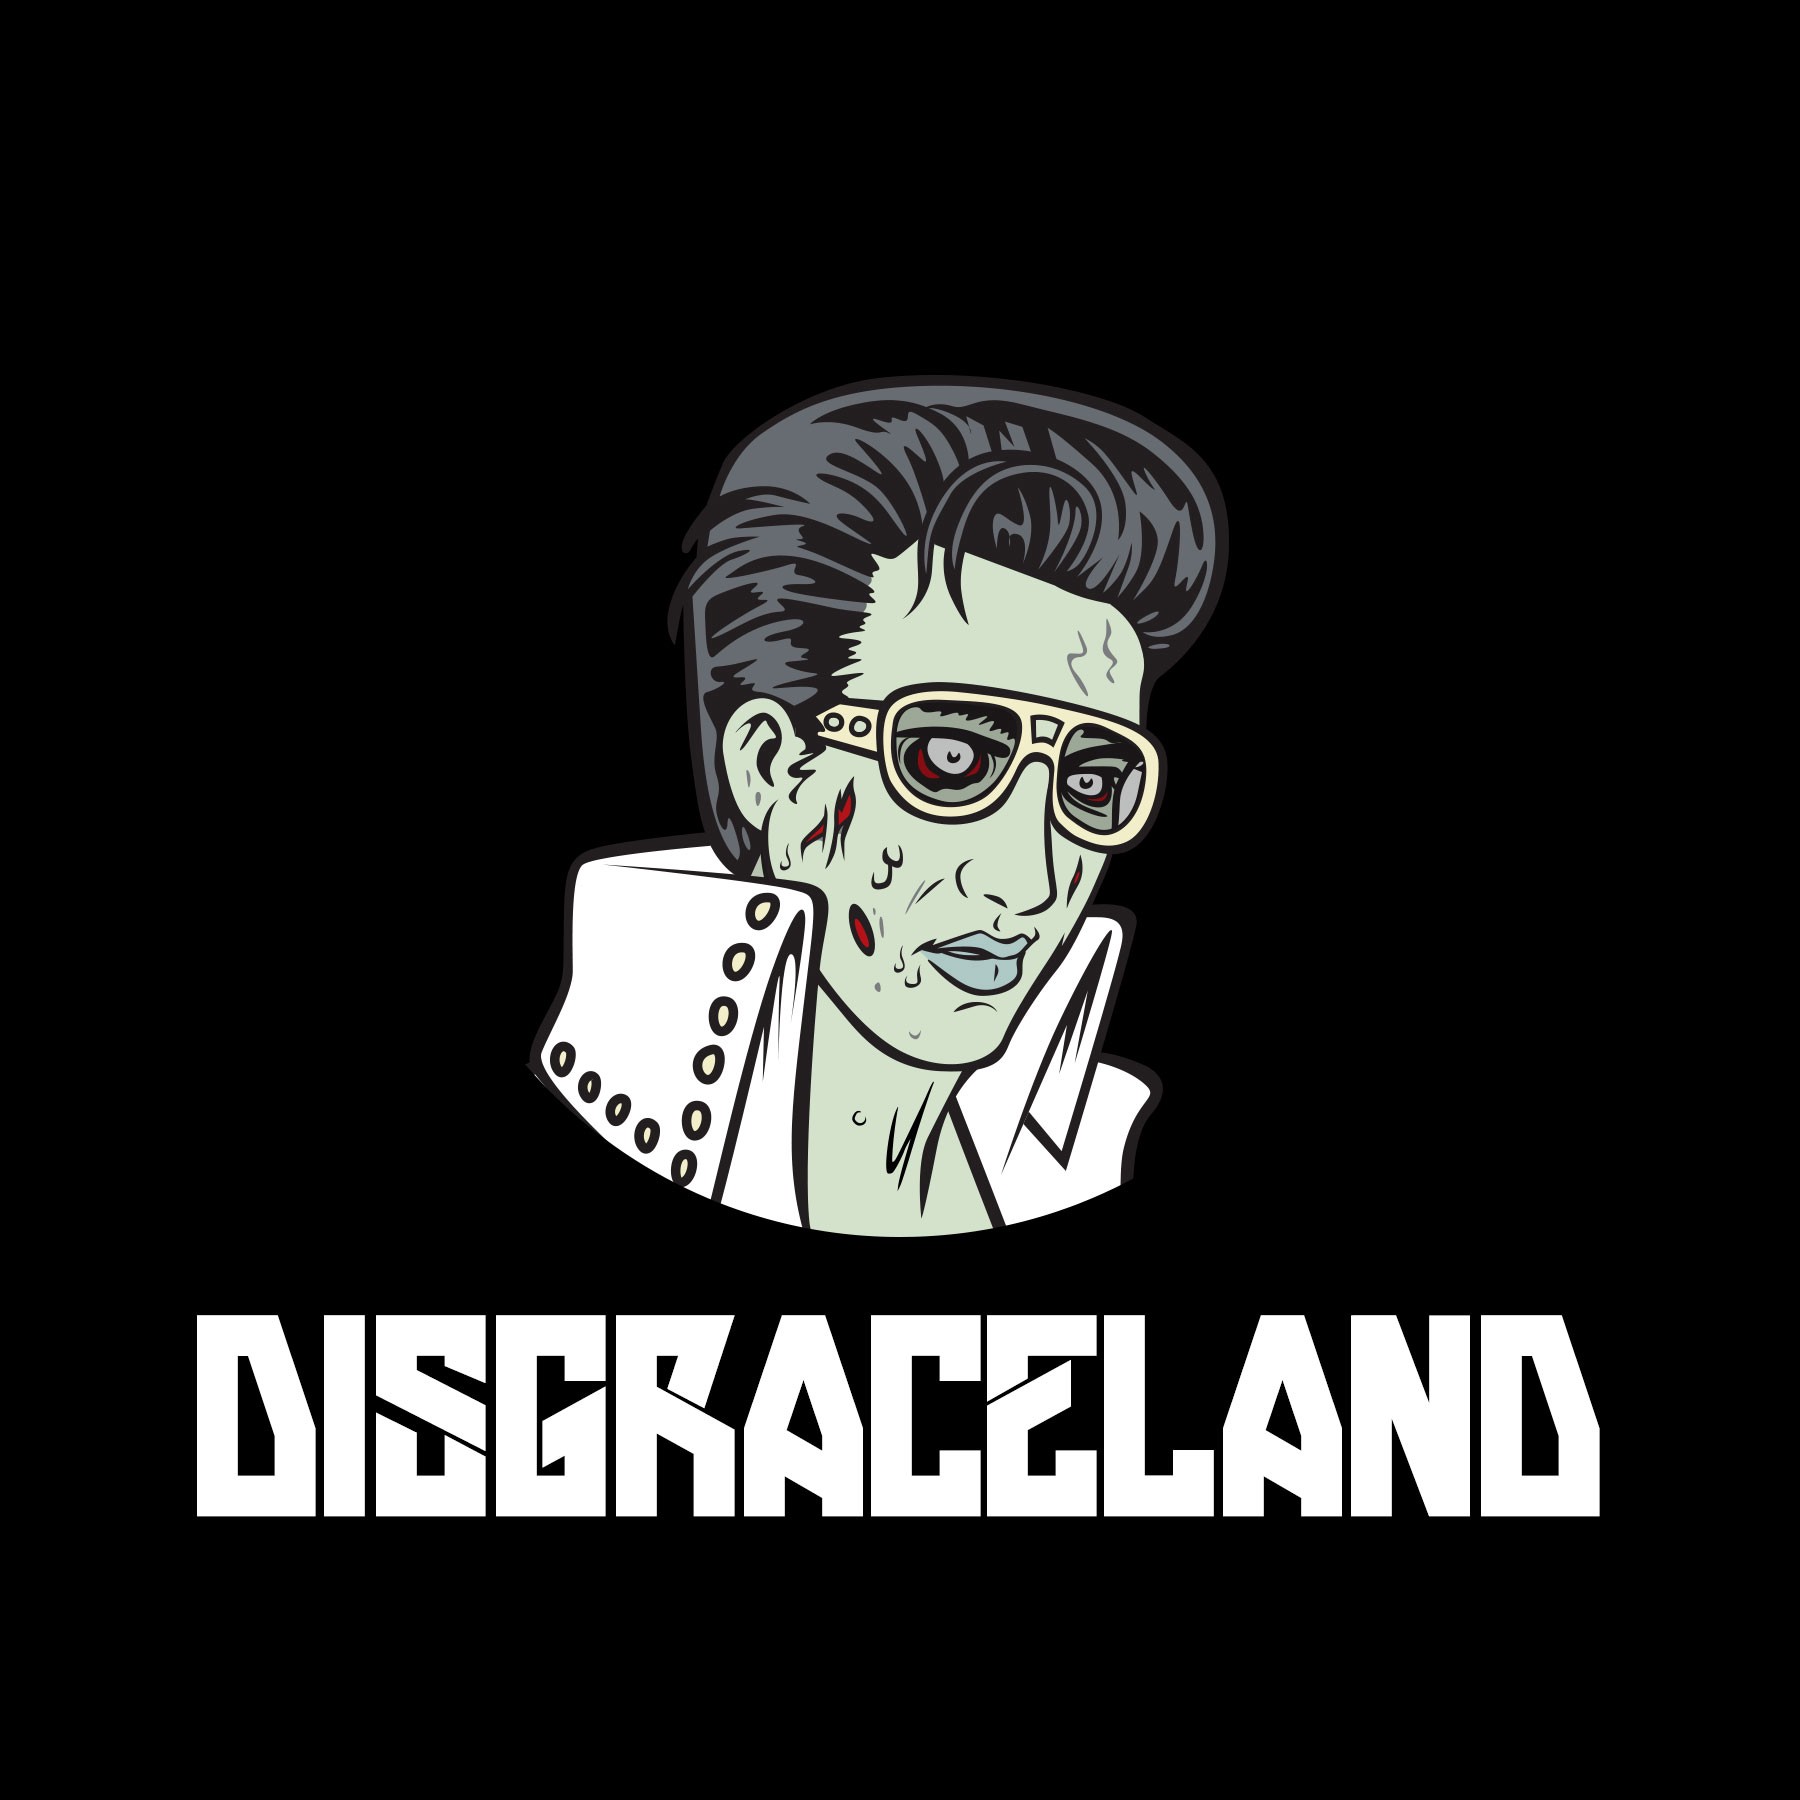 The image depicts Elvis Presley as a green zombie, wearing a beaded white jacket and gold glasses. The name Disgraceland is placed below Elvis in capitalized text.